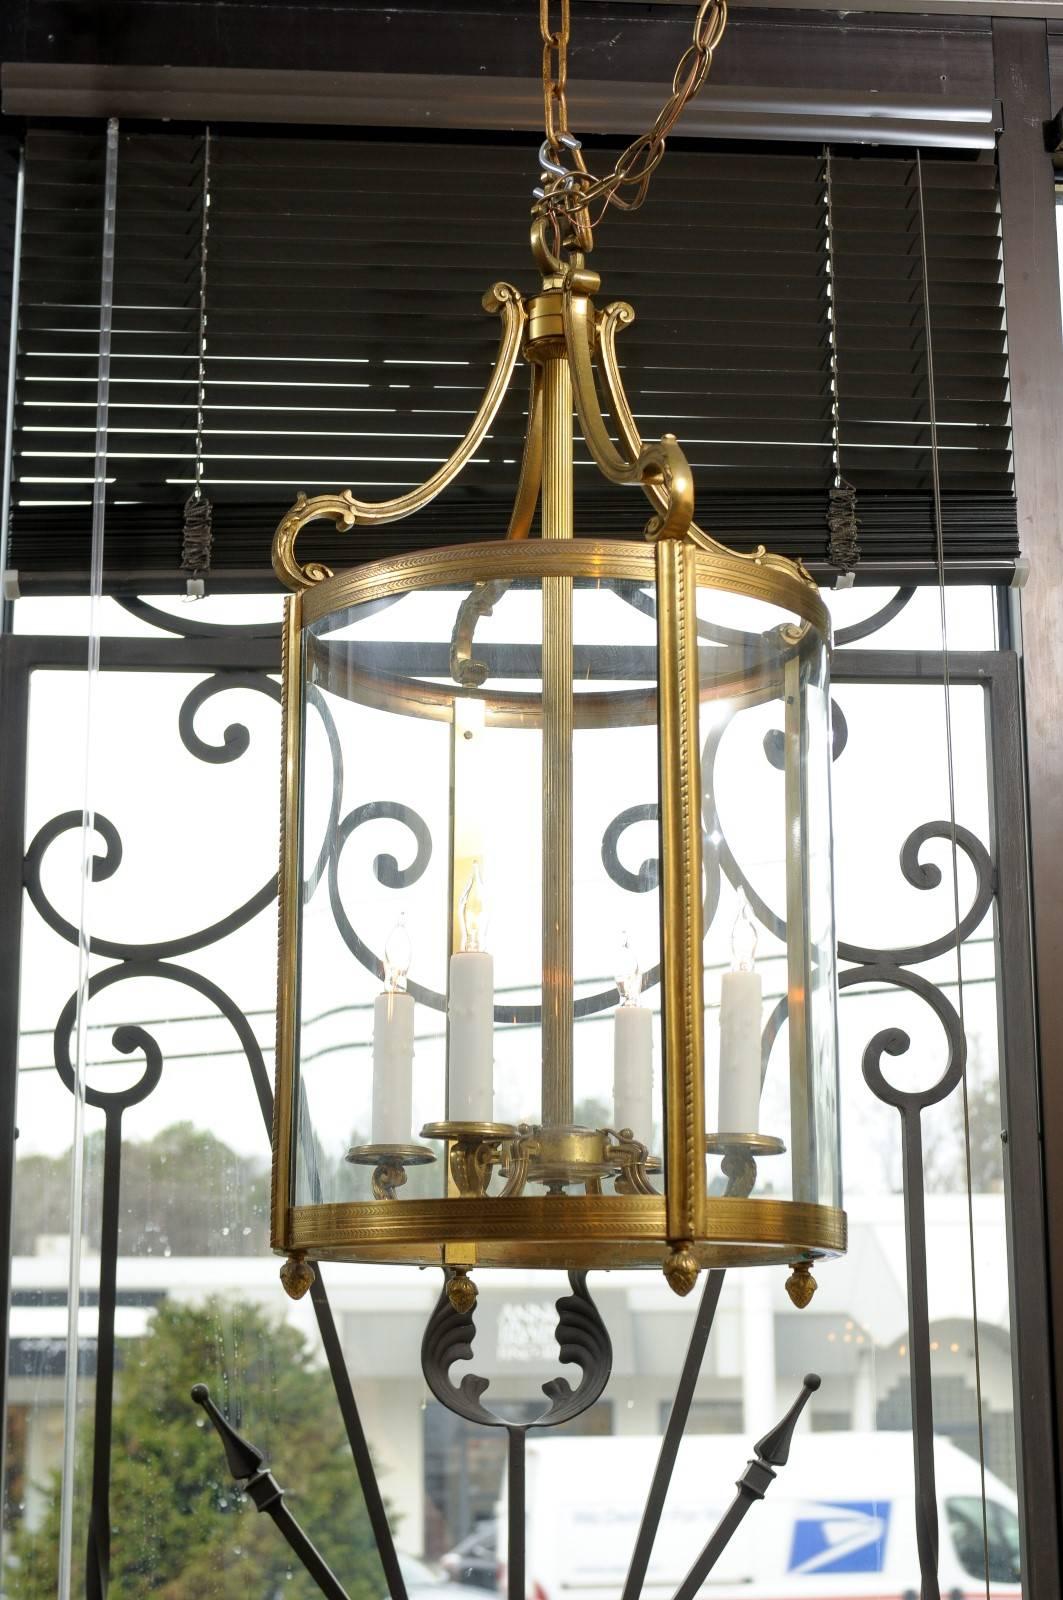 Mid-20th century French Louis XVI style round brass lantern with four (4) lights and acorn finials.